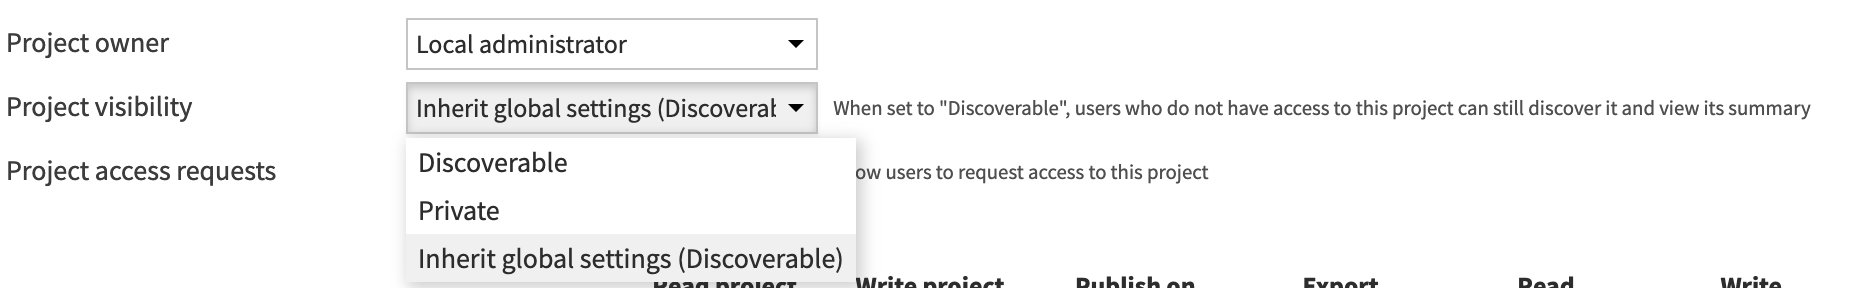 Project access and request settings on the Security page.